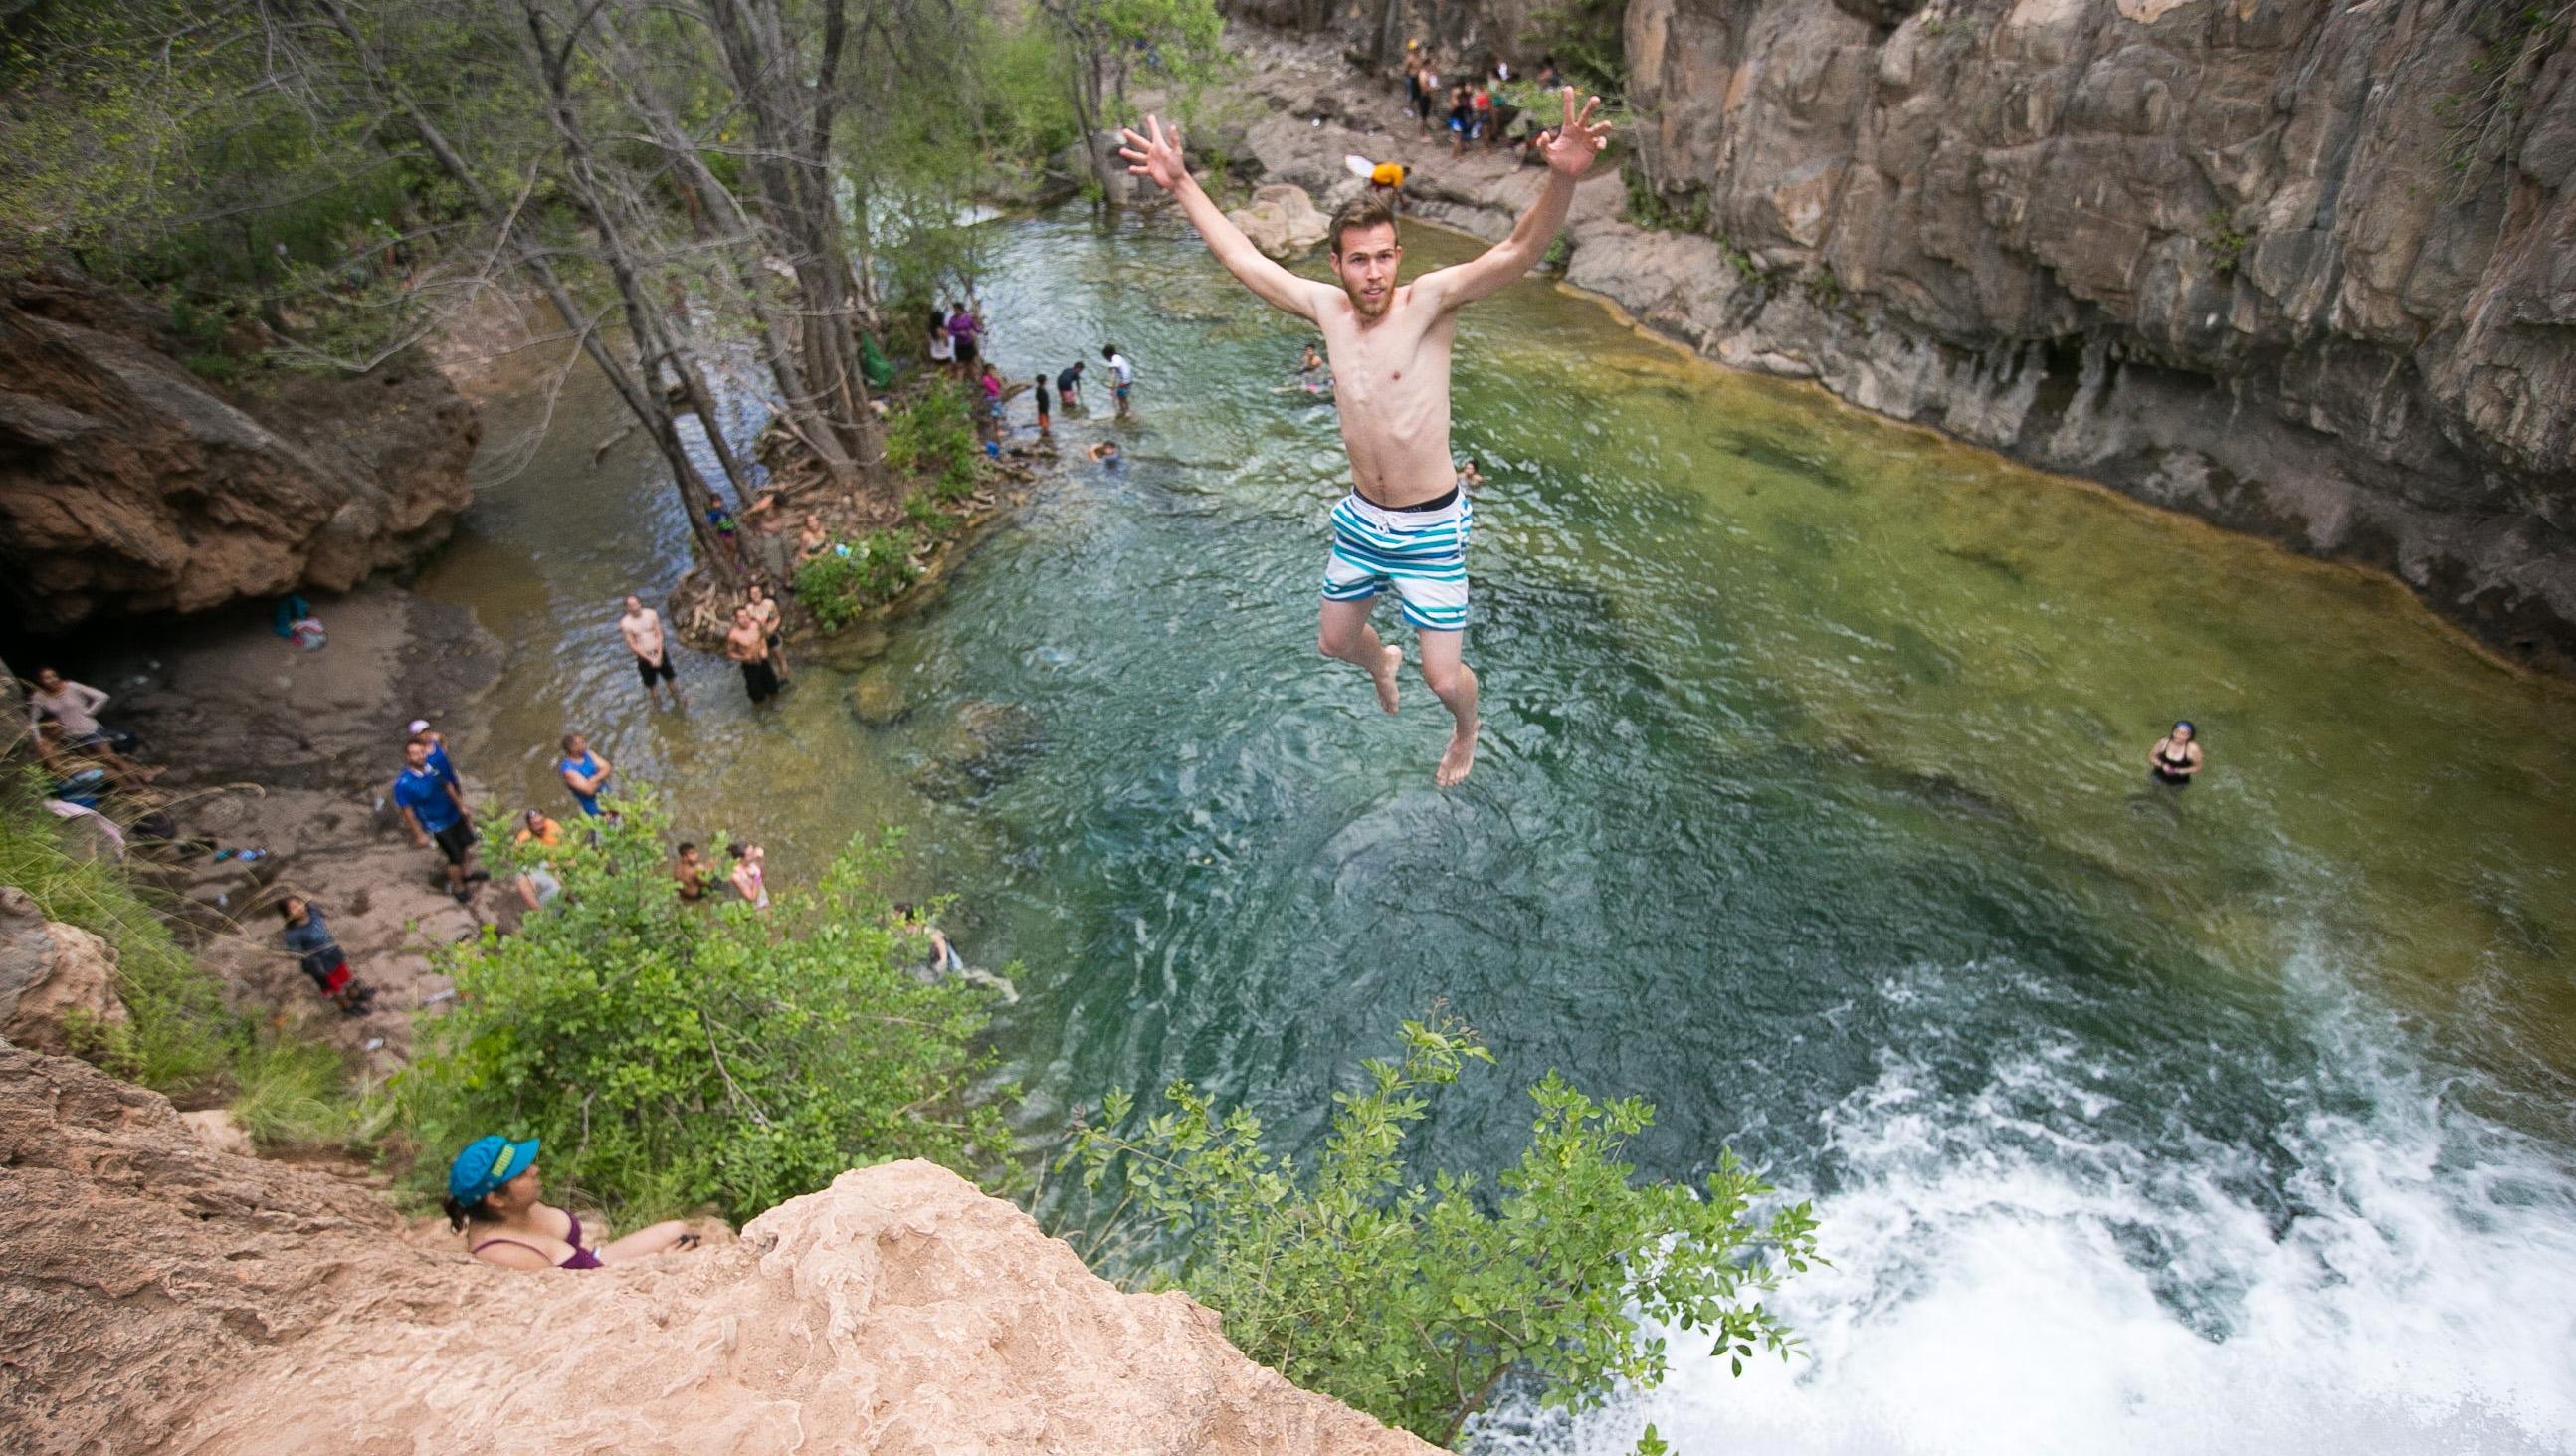 Visiting Fossil Creek soon? Know what you're getting into